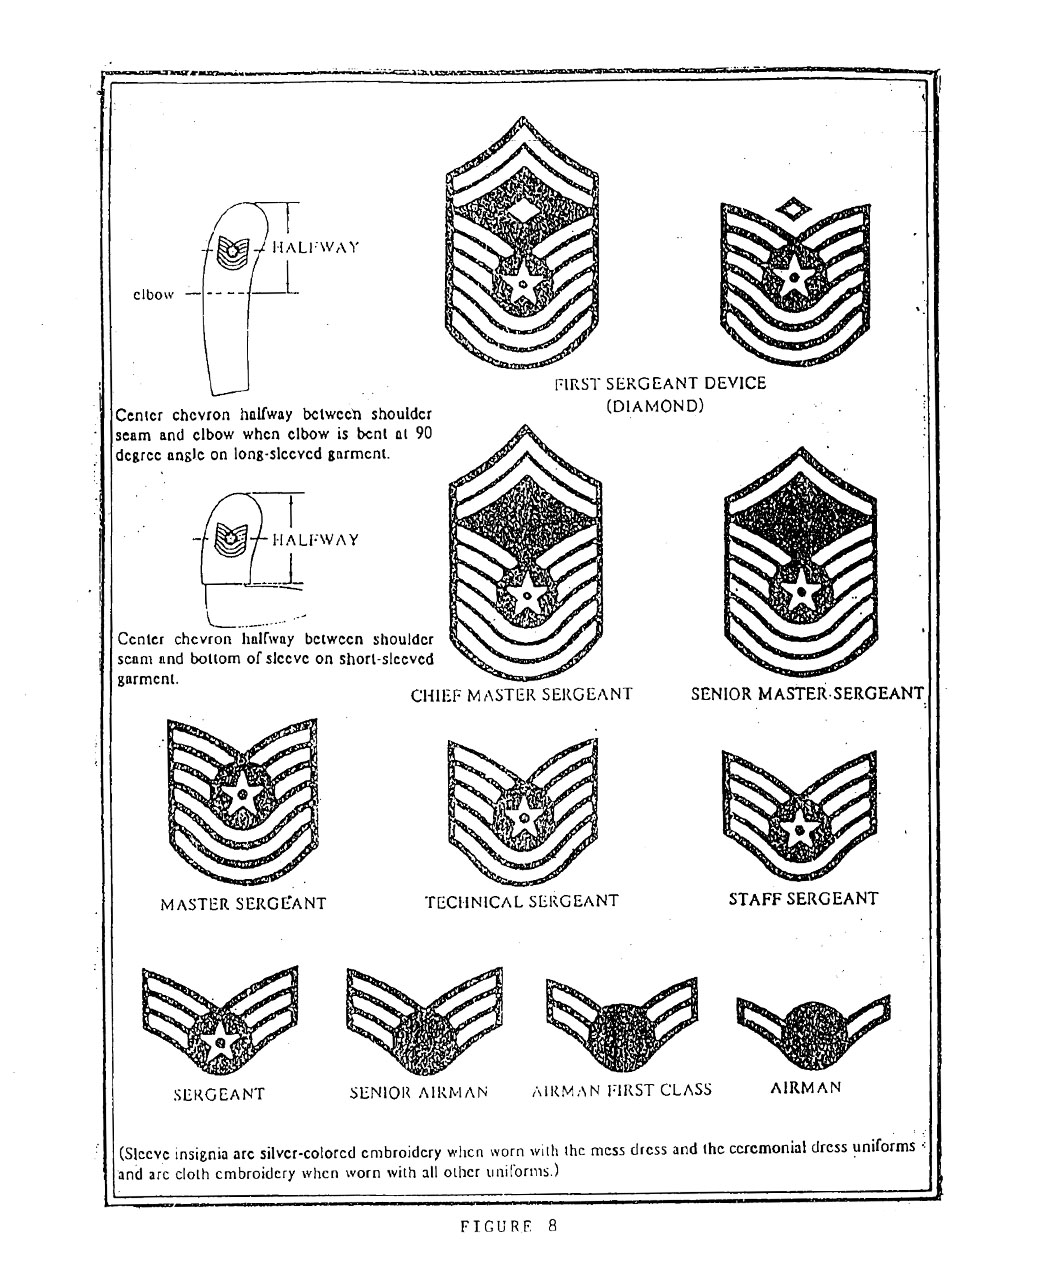 A Chronology of the Enlisted Rank Chevron > Air Force Security Forces ...